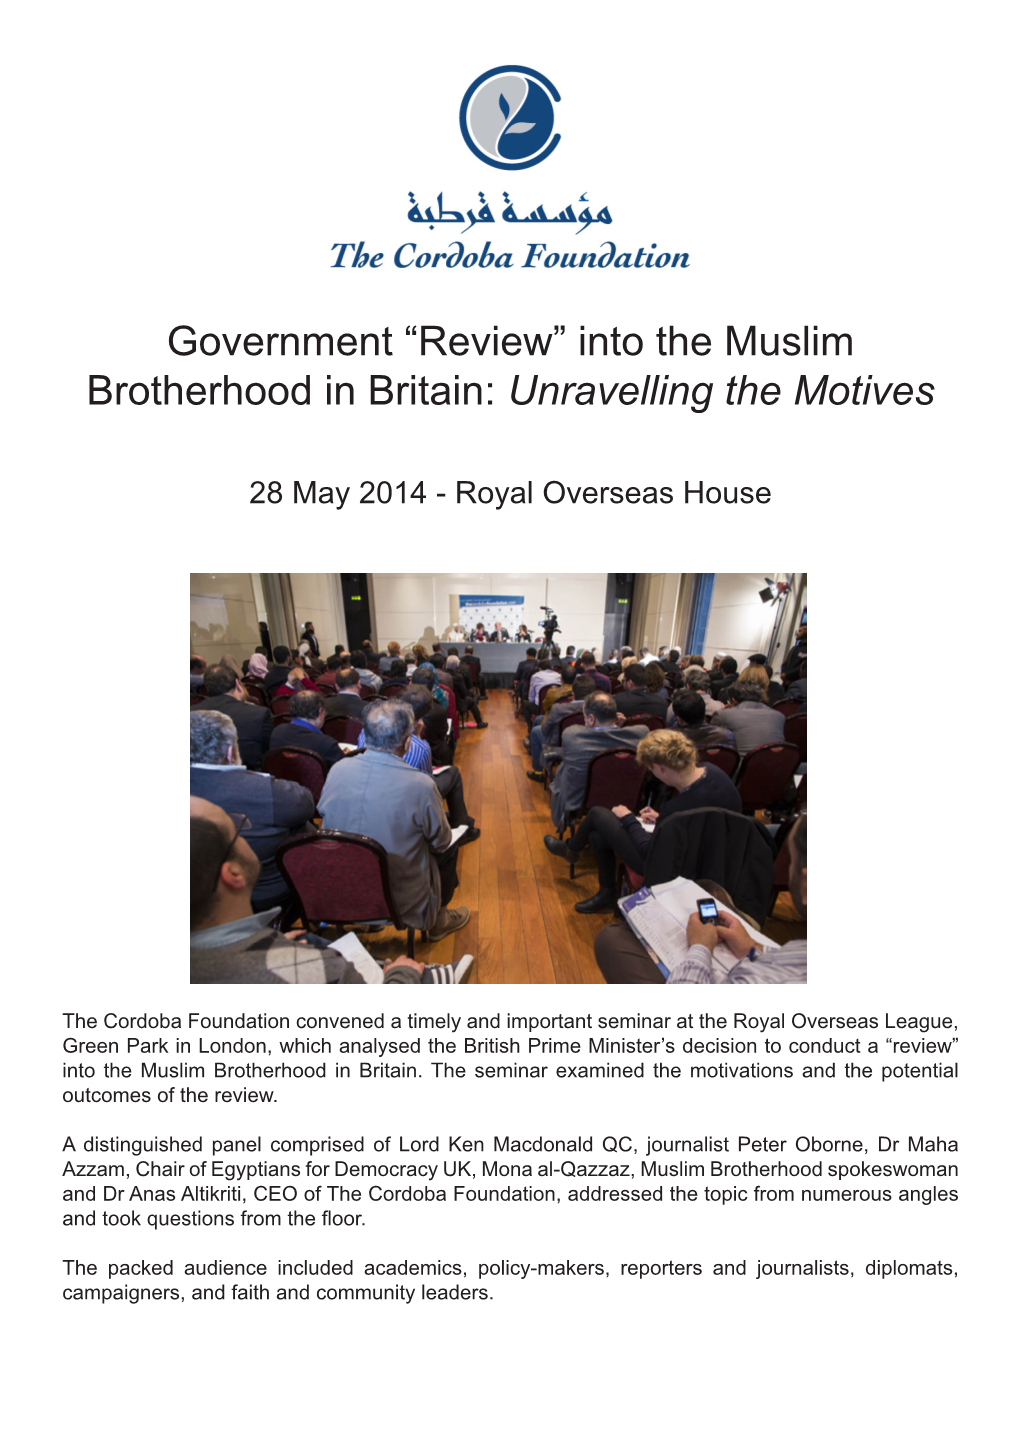 Into the Muslim Brotherhood in Britain: Unravelling the Motives